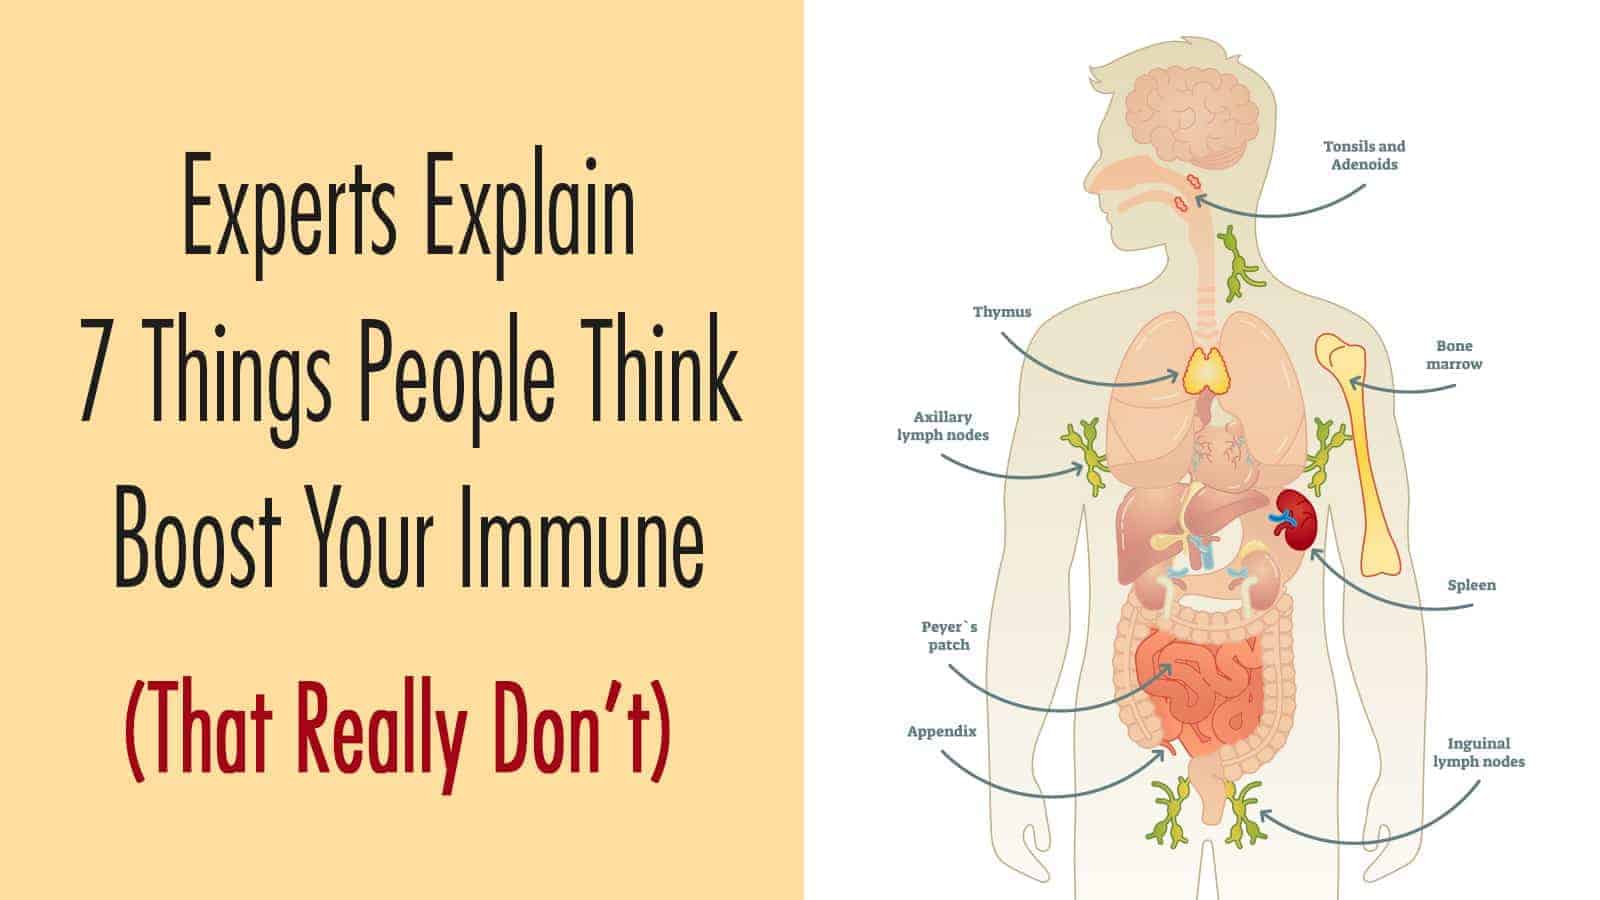 Experts Explain 7 Things People Think Boost Your Immune System (That Really Don’t)